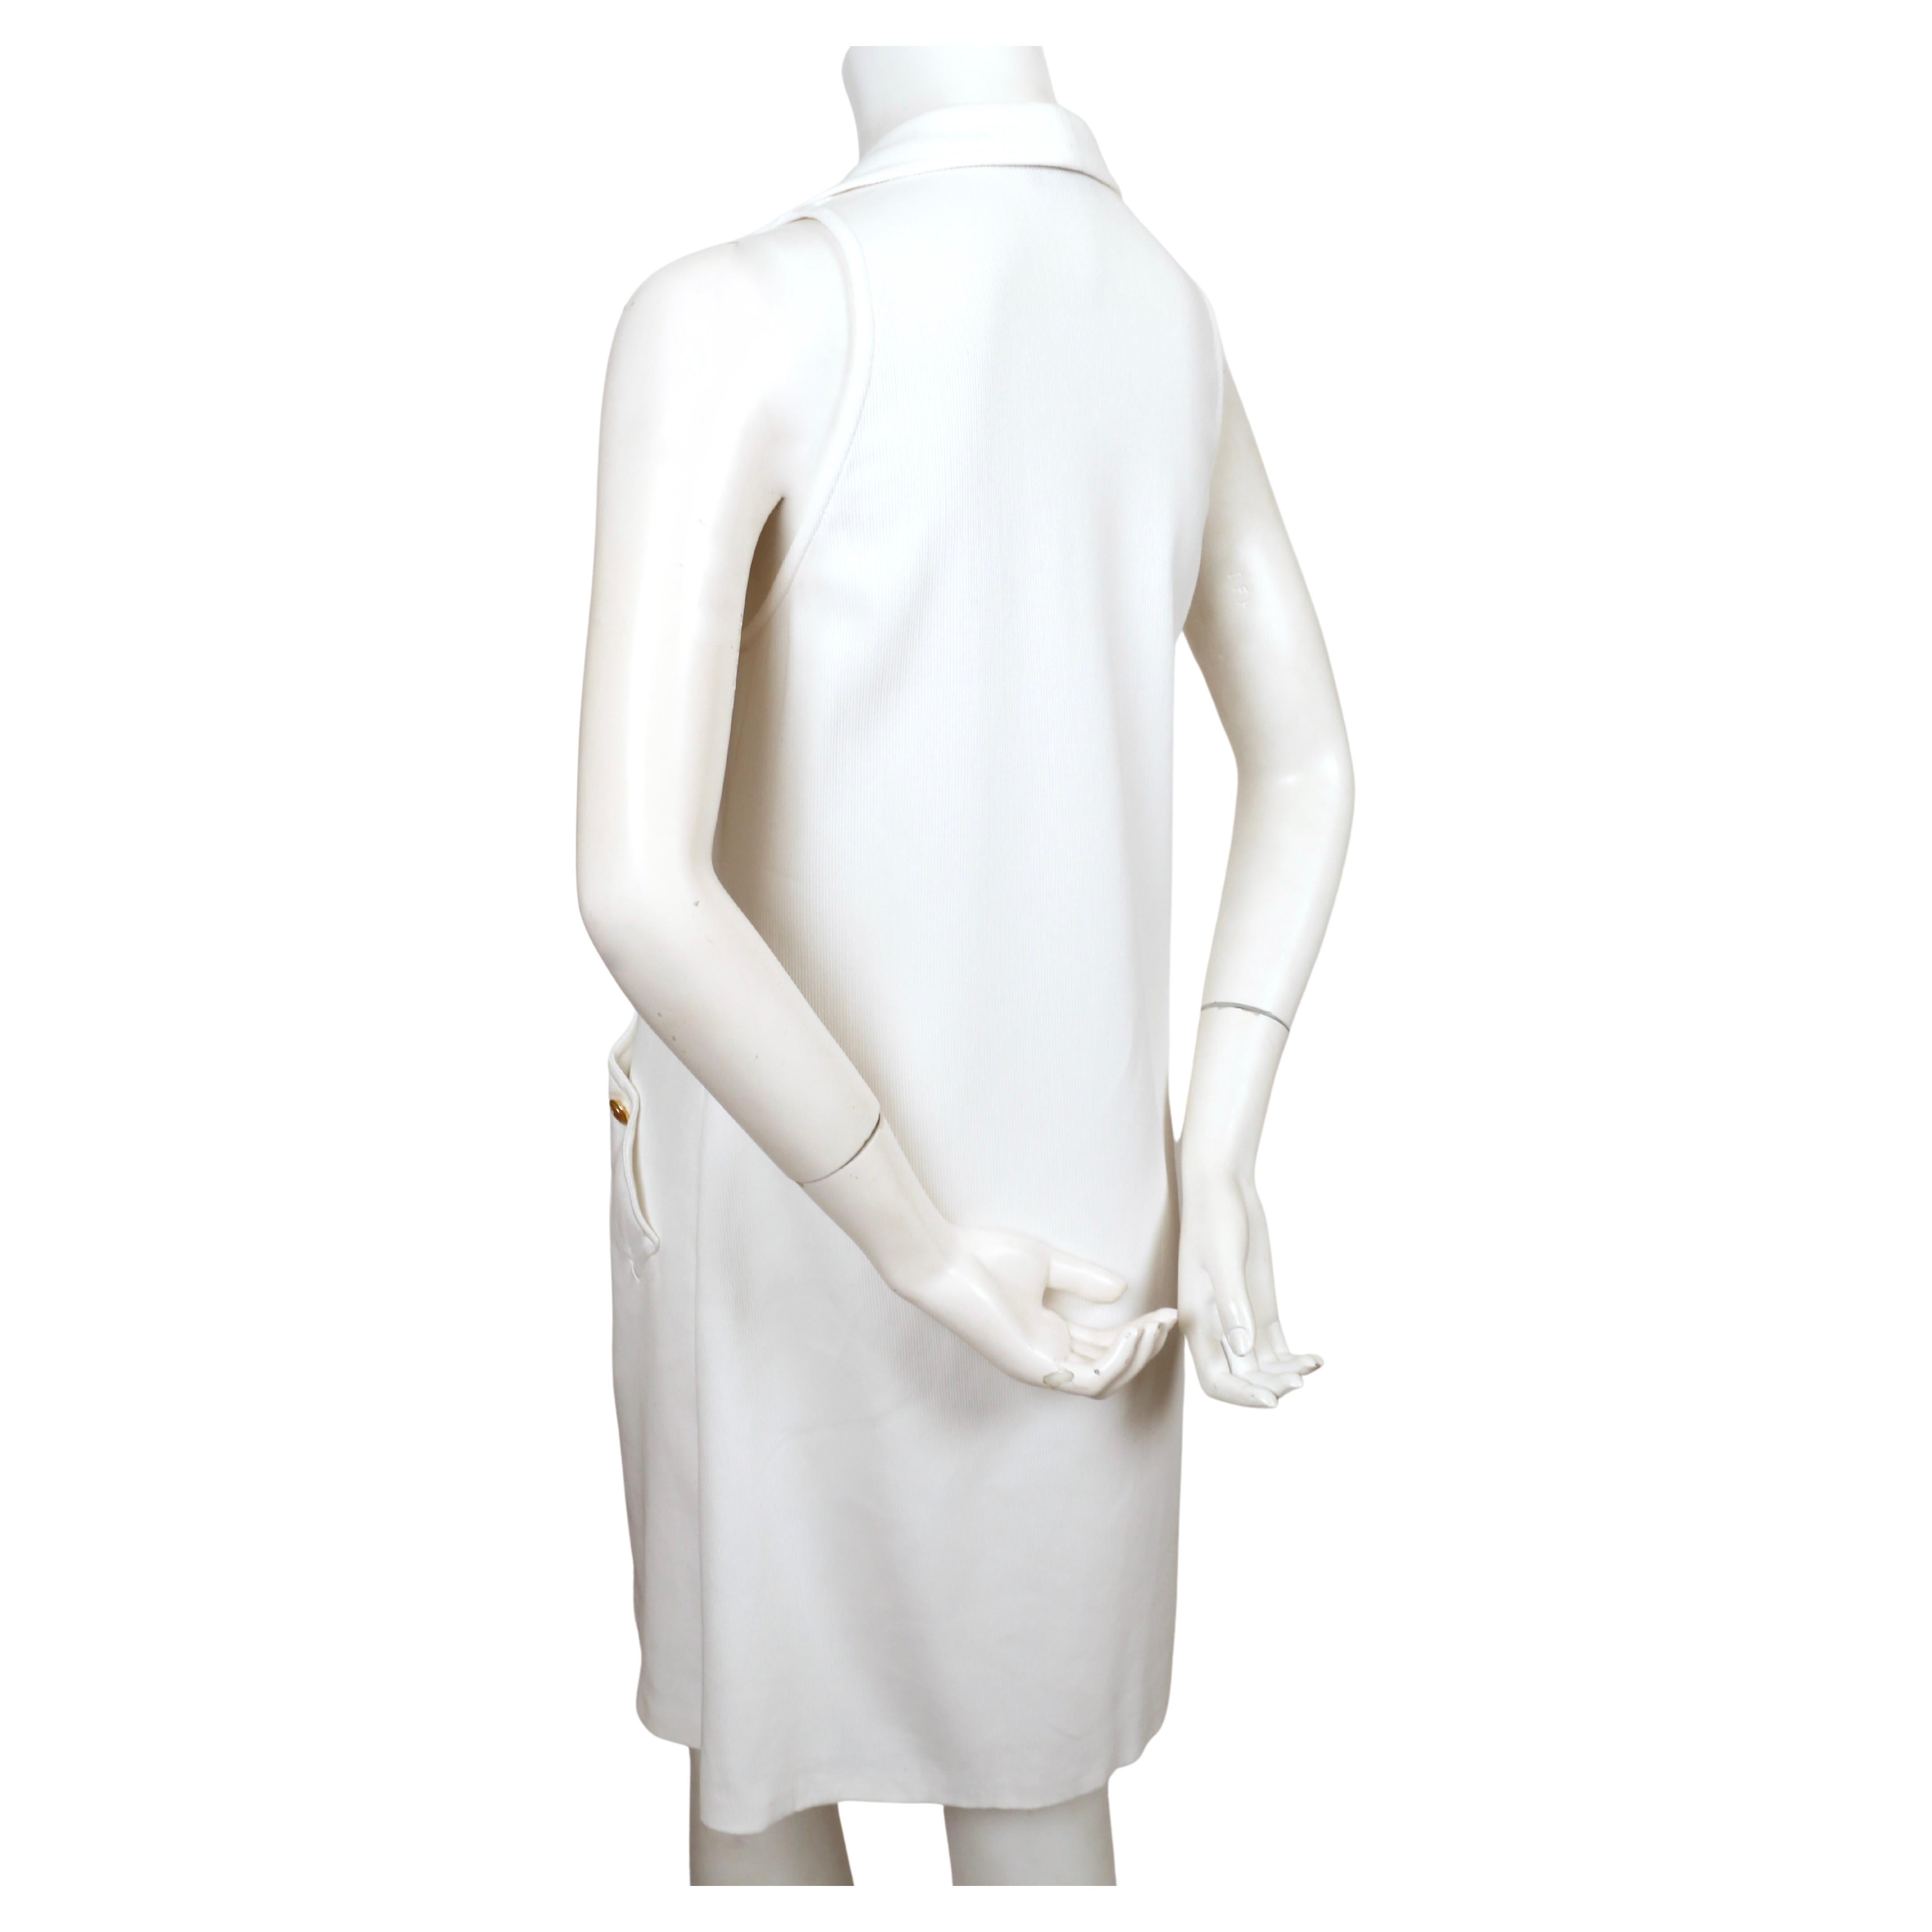 Very rare, ribbed white sleeveless dress with gold interlocking GG buttons designed by Tom Ford from Gucci dating to 1994.  No size is indicated however this best fits a US 2-6. Approximate measurements: bust 33', hips 38